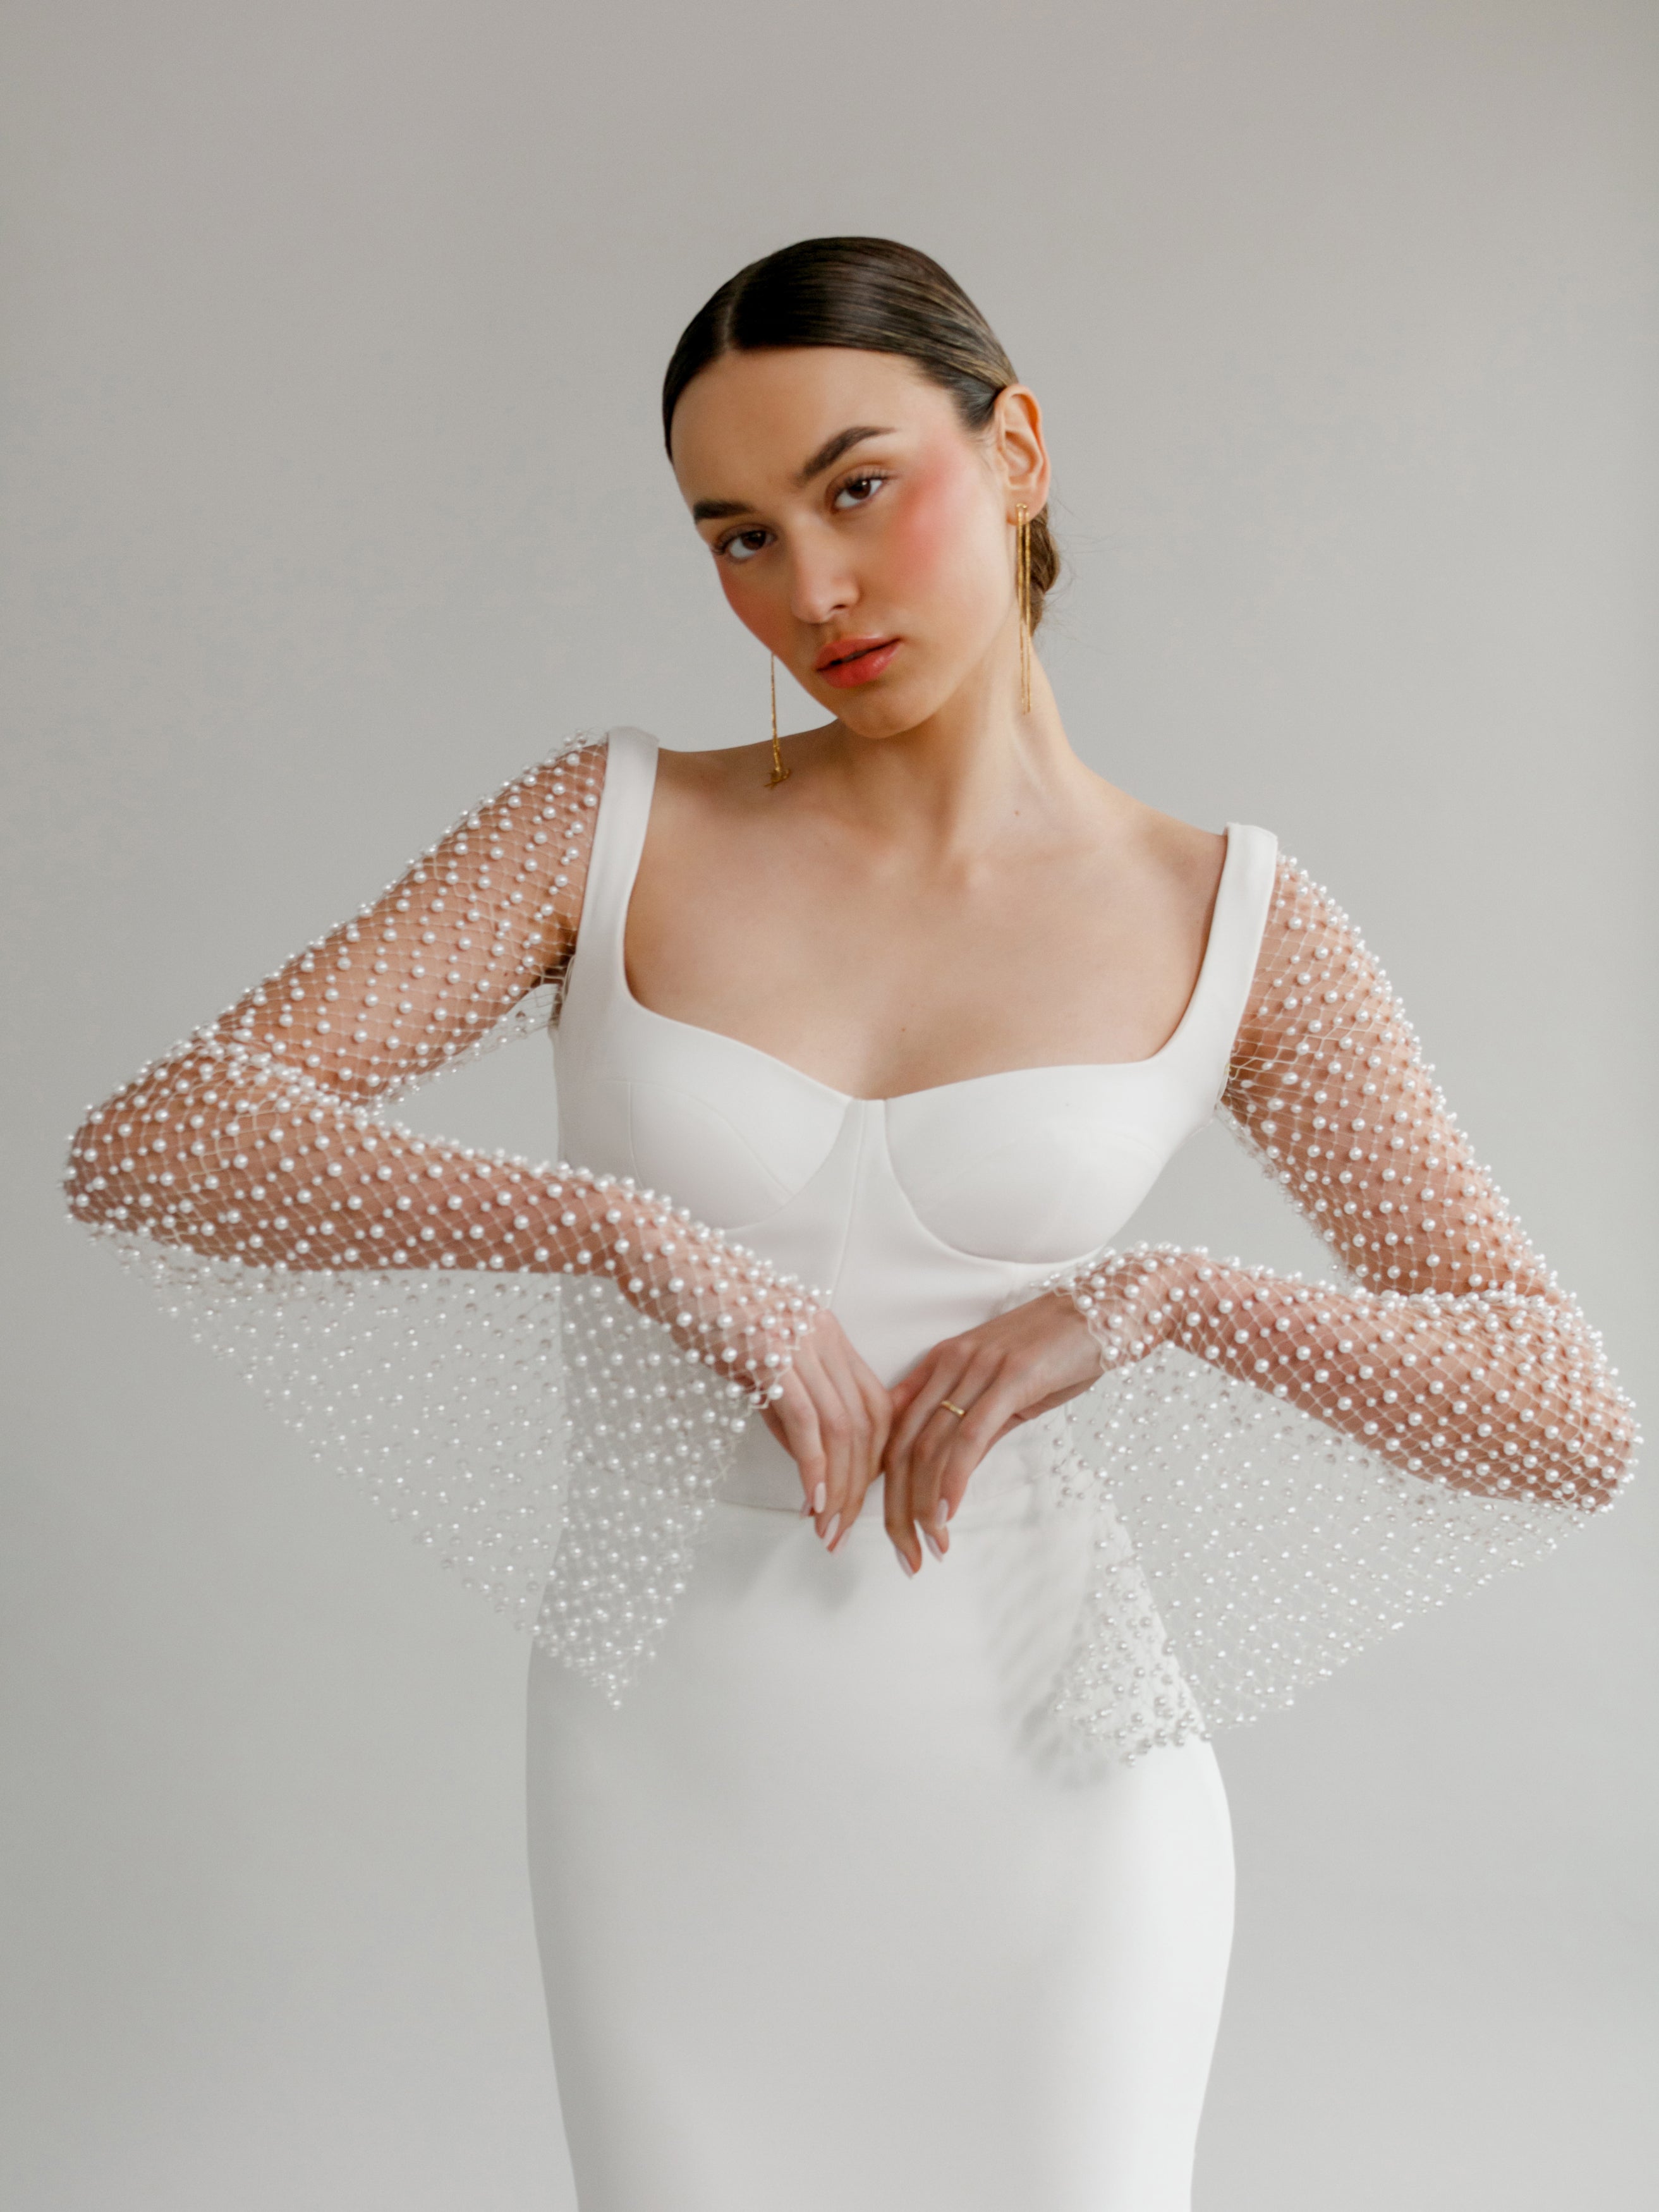 Pearl Bell Sleeve : A detachable bell sleeve made of pearl netting